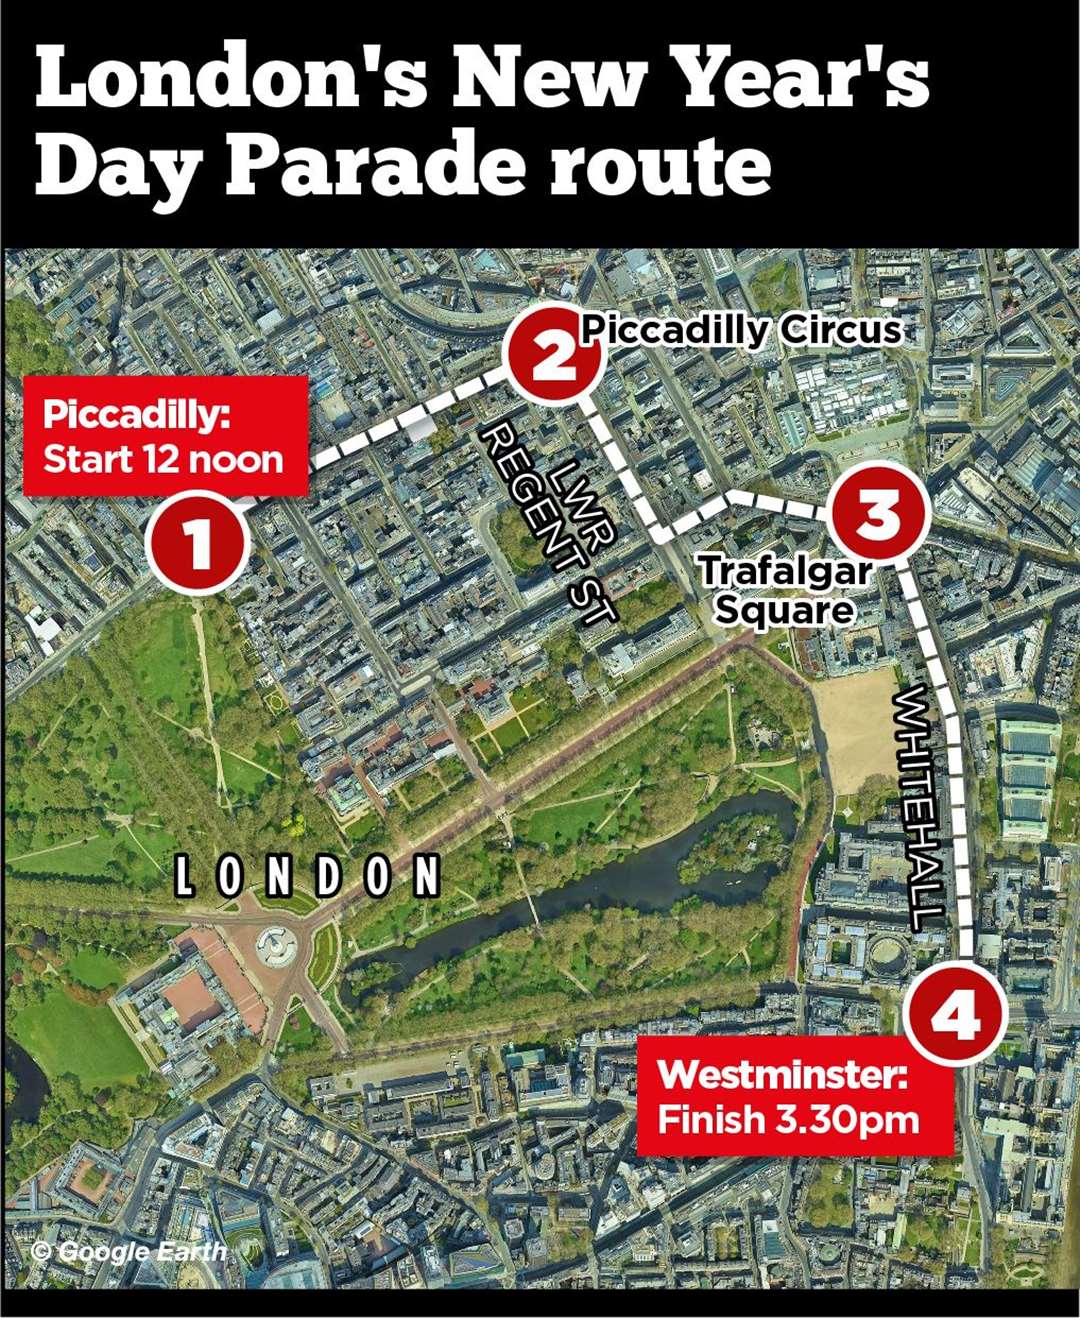 The New Year's Day parade route